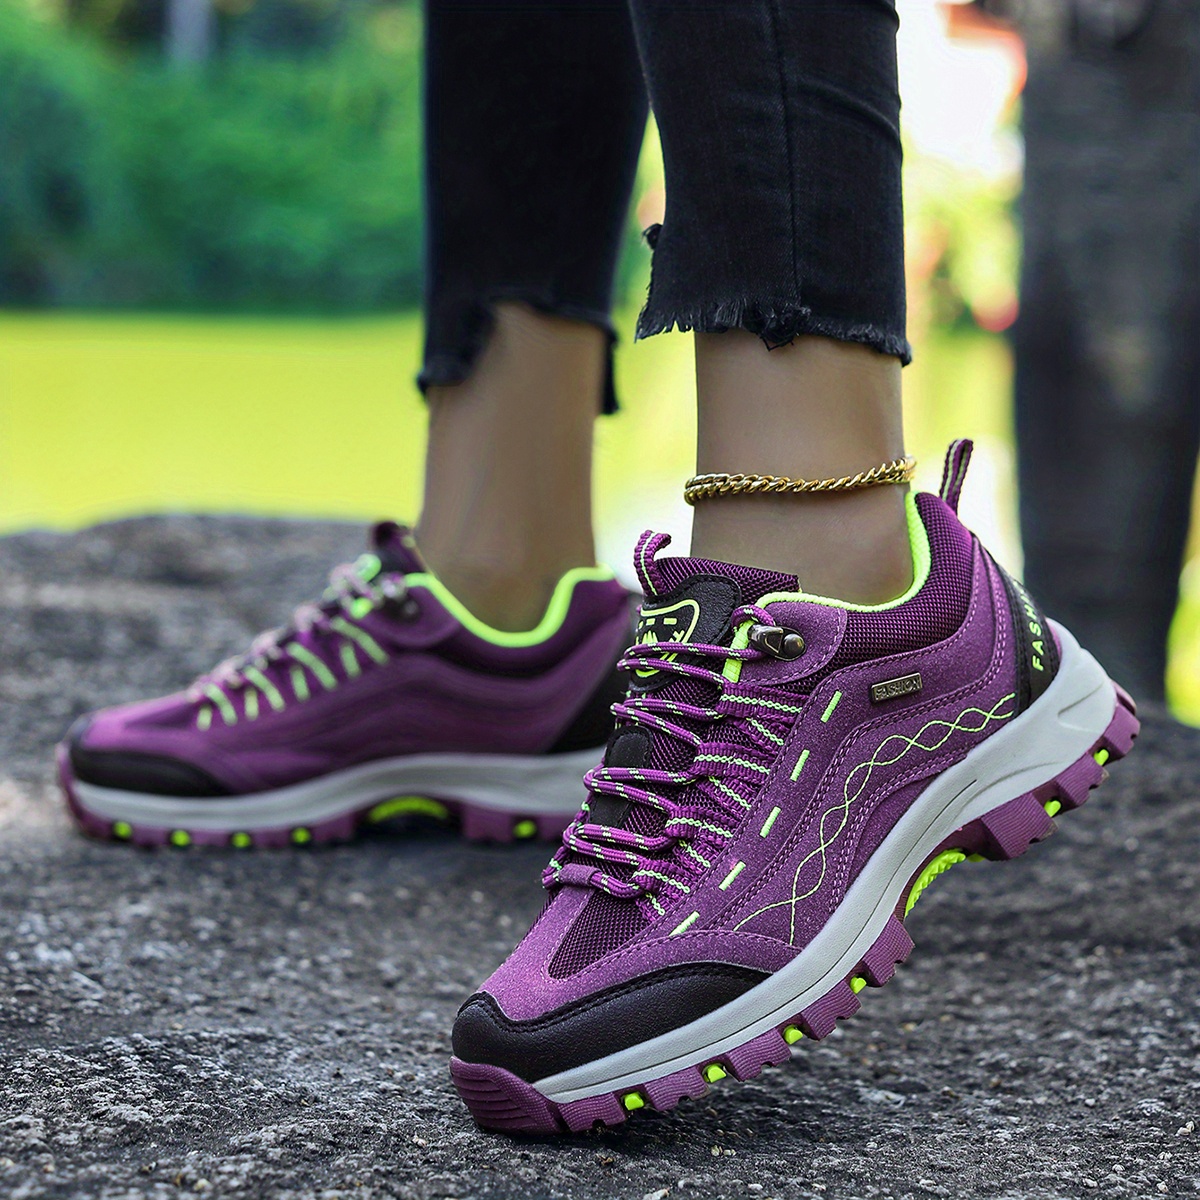 Women's Fashionable Comfortable Outdoor Leisure Sports Shoes